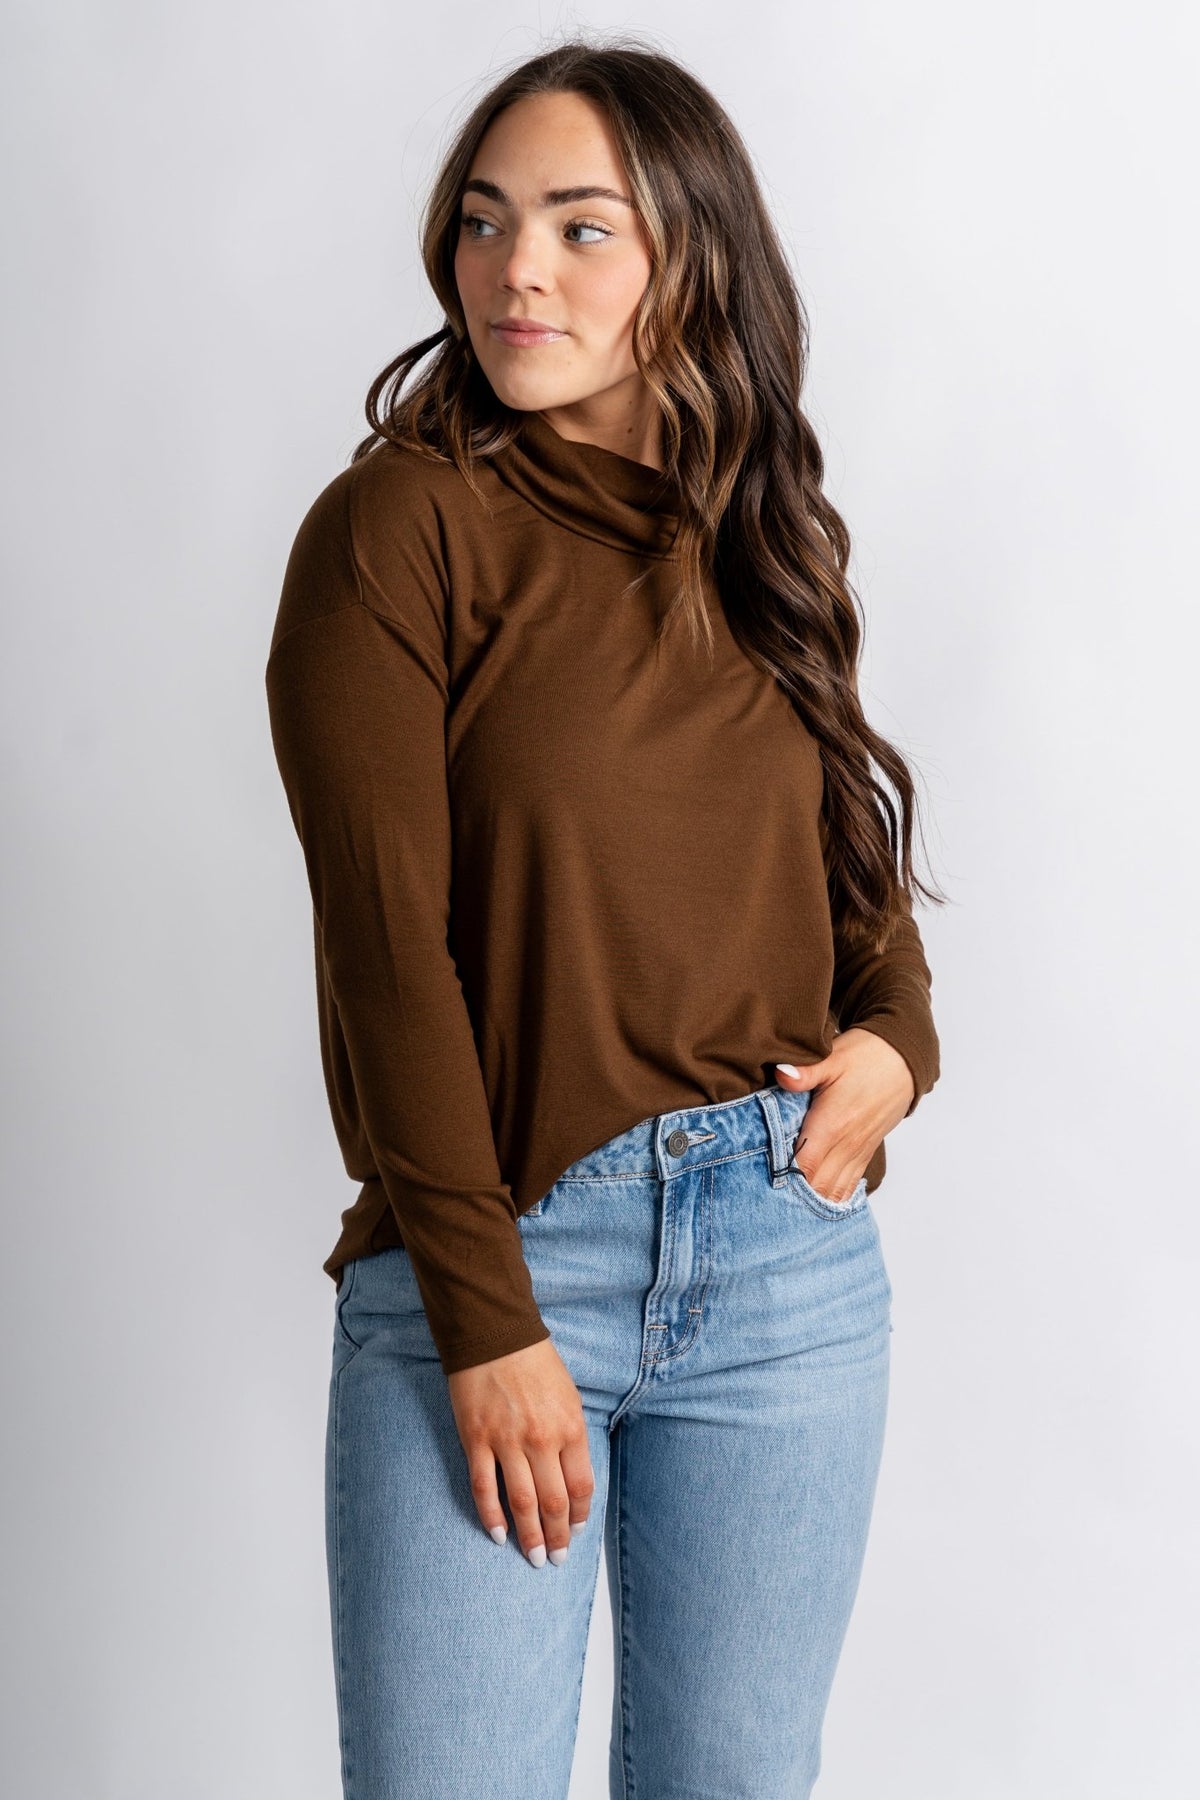 Mock cowl neck long sleeve top espresso – Boutique Sweaters | Fashionable Sweaters at Lush Fashion Lounge Boutique in Oklahoma City